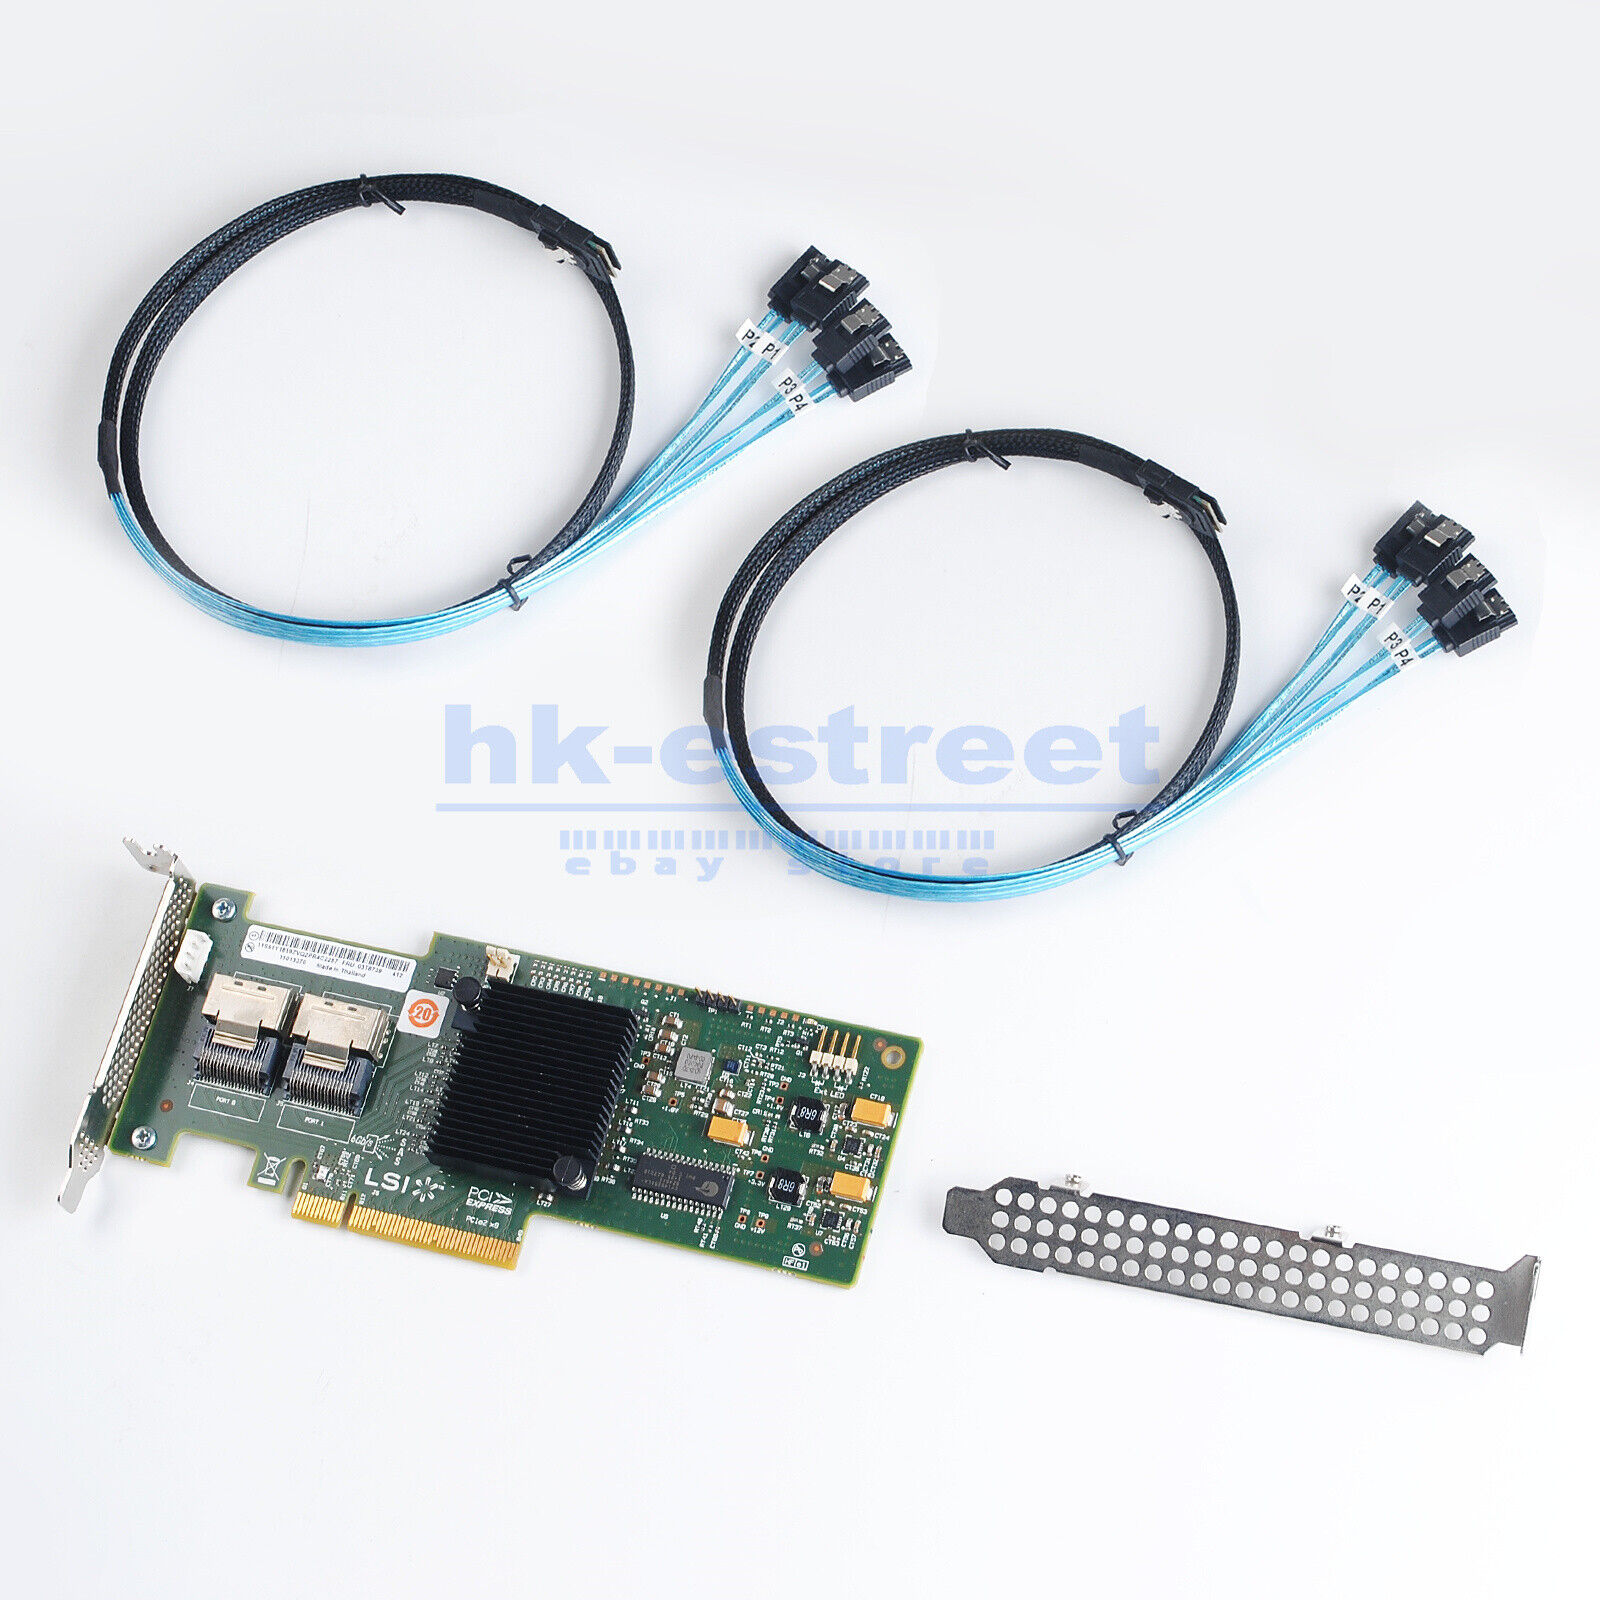 LSI 6Gbps 9240-8i FW:P20 IT Mode ZFS FreeNAS unRAID + 2*SFF-8087 SATA Cable US